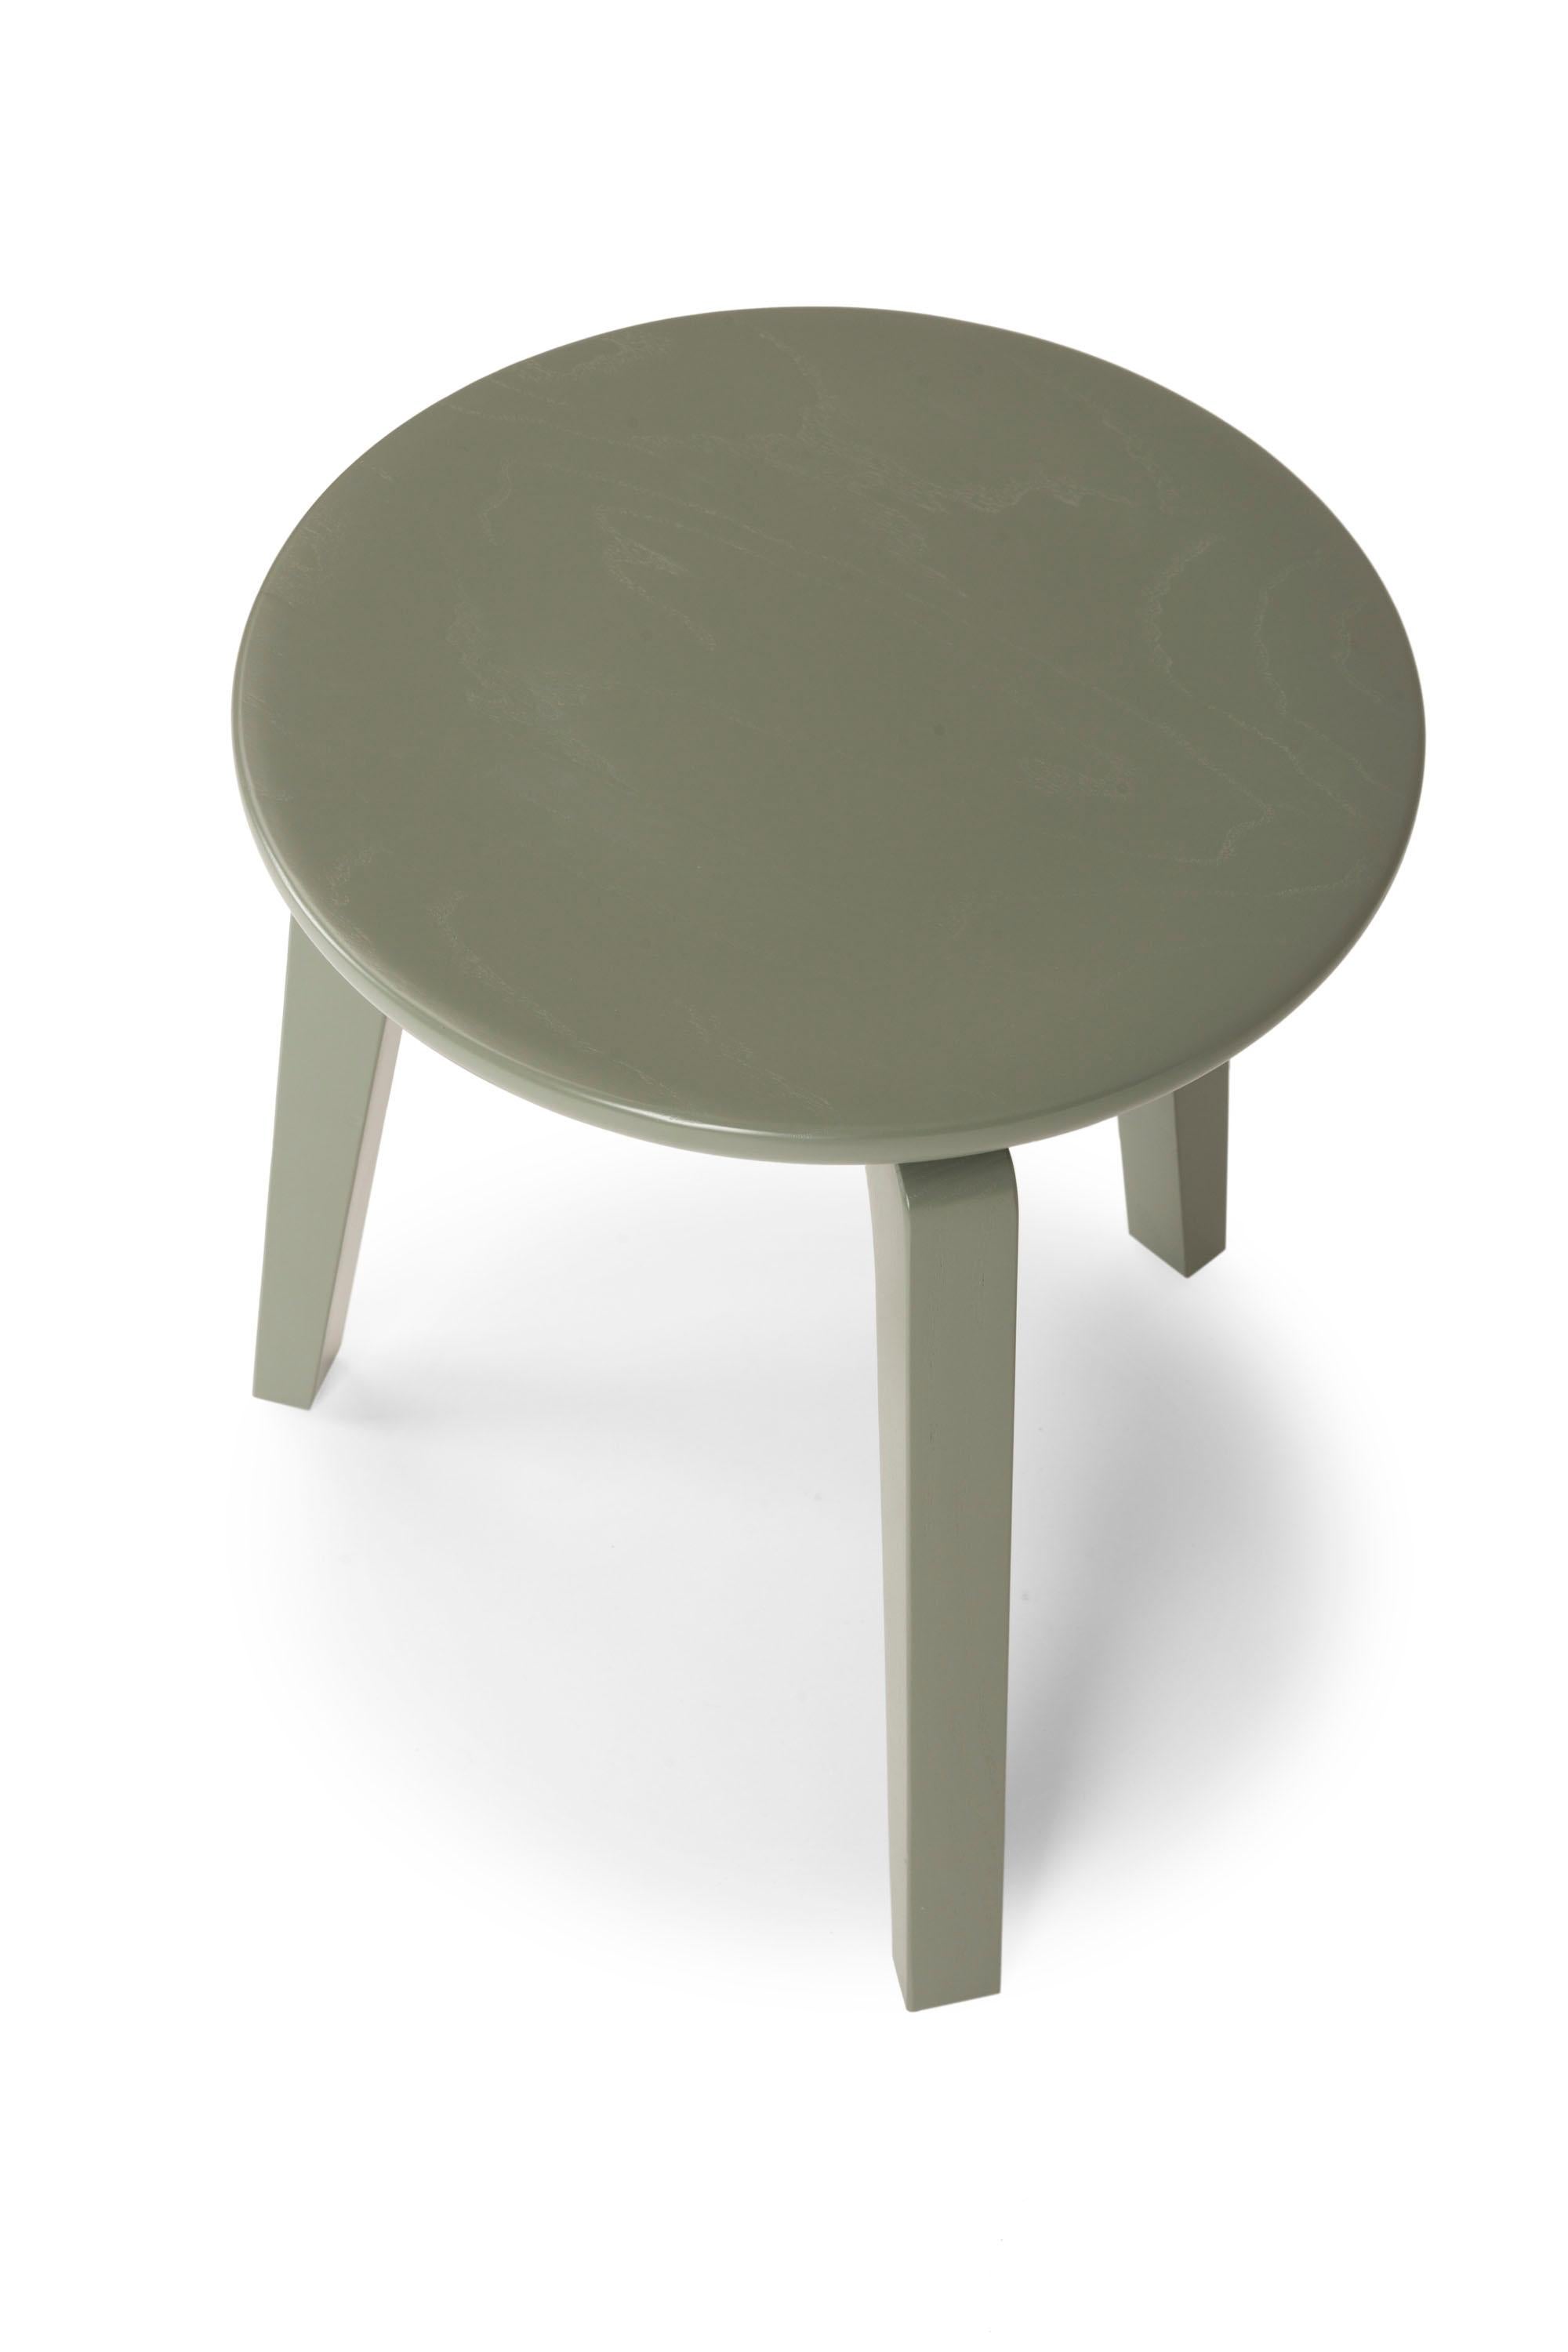 Italian 21st Century Modern Green Wooden Lacquered Low Stool TOD Made in Italy For Sale